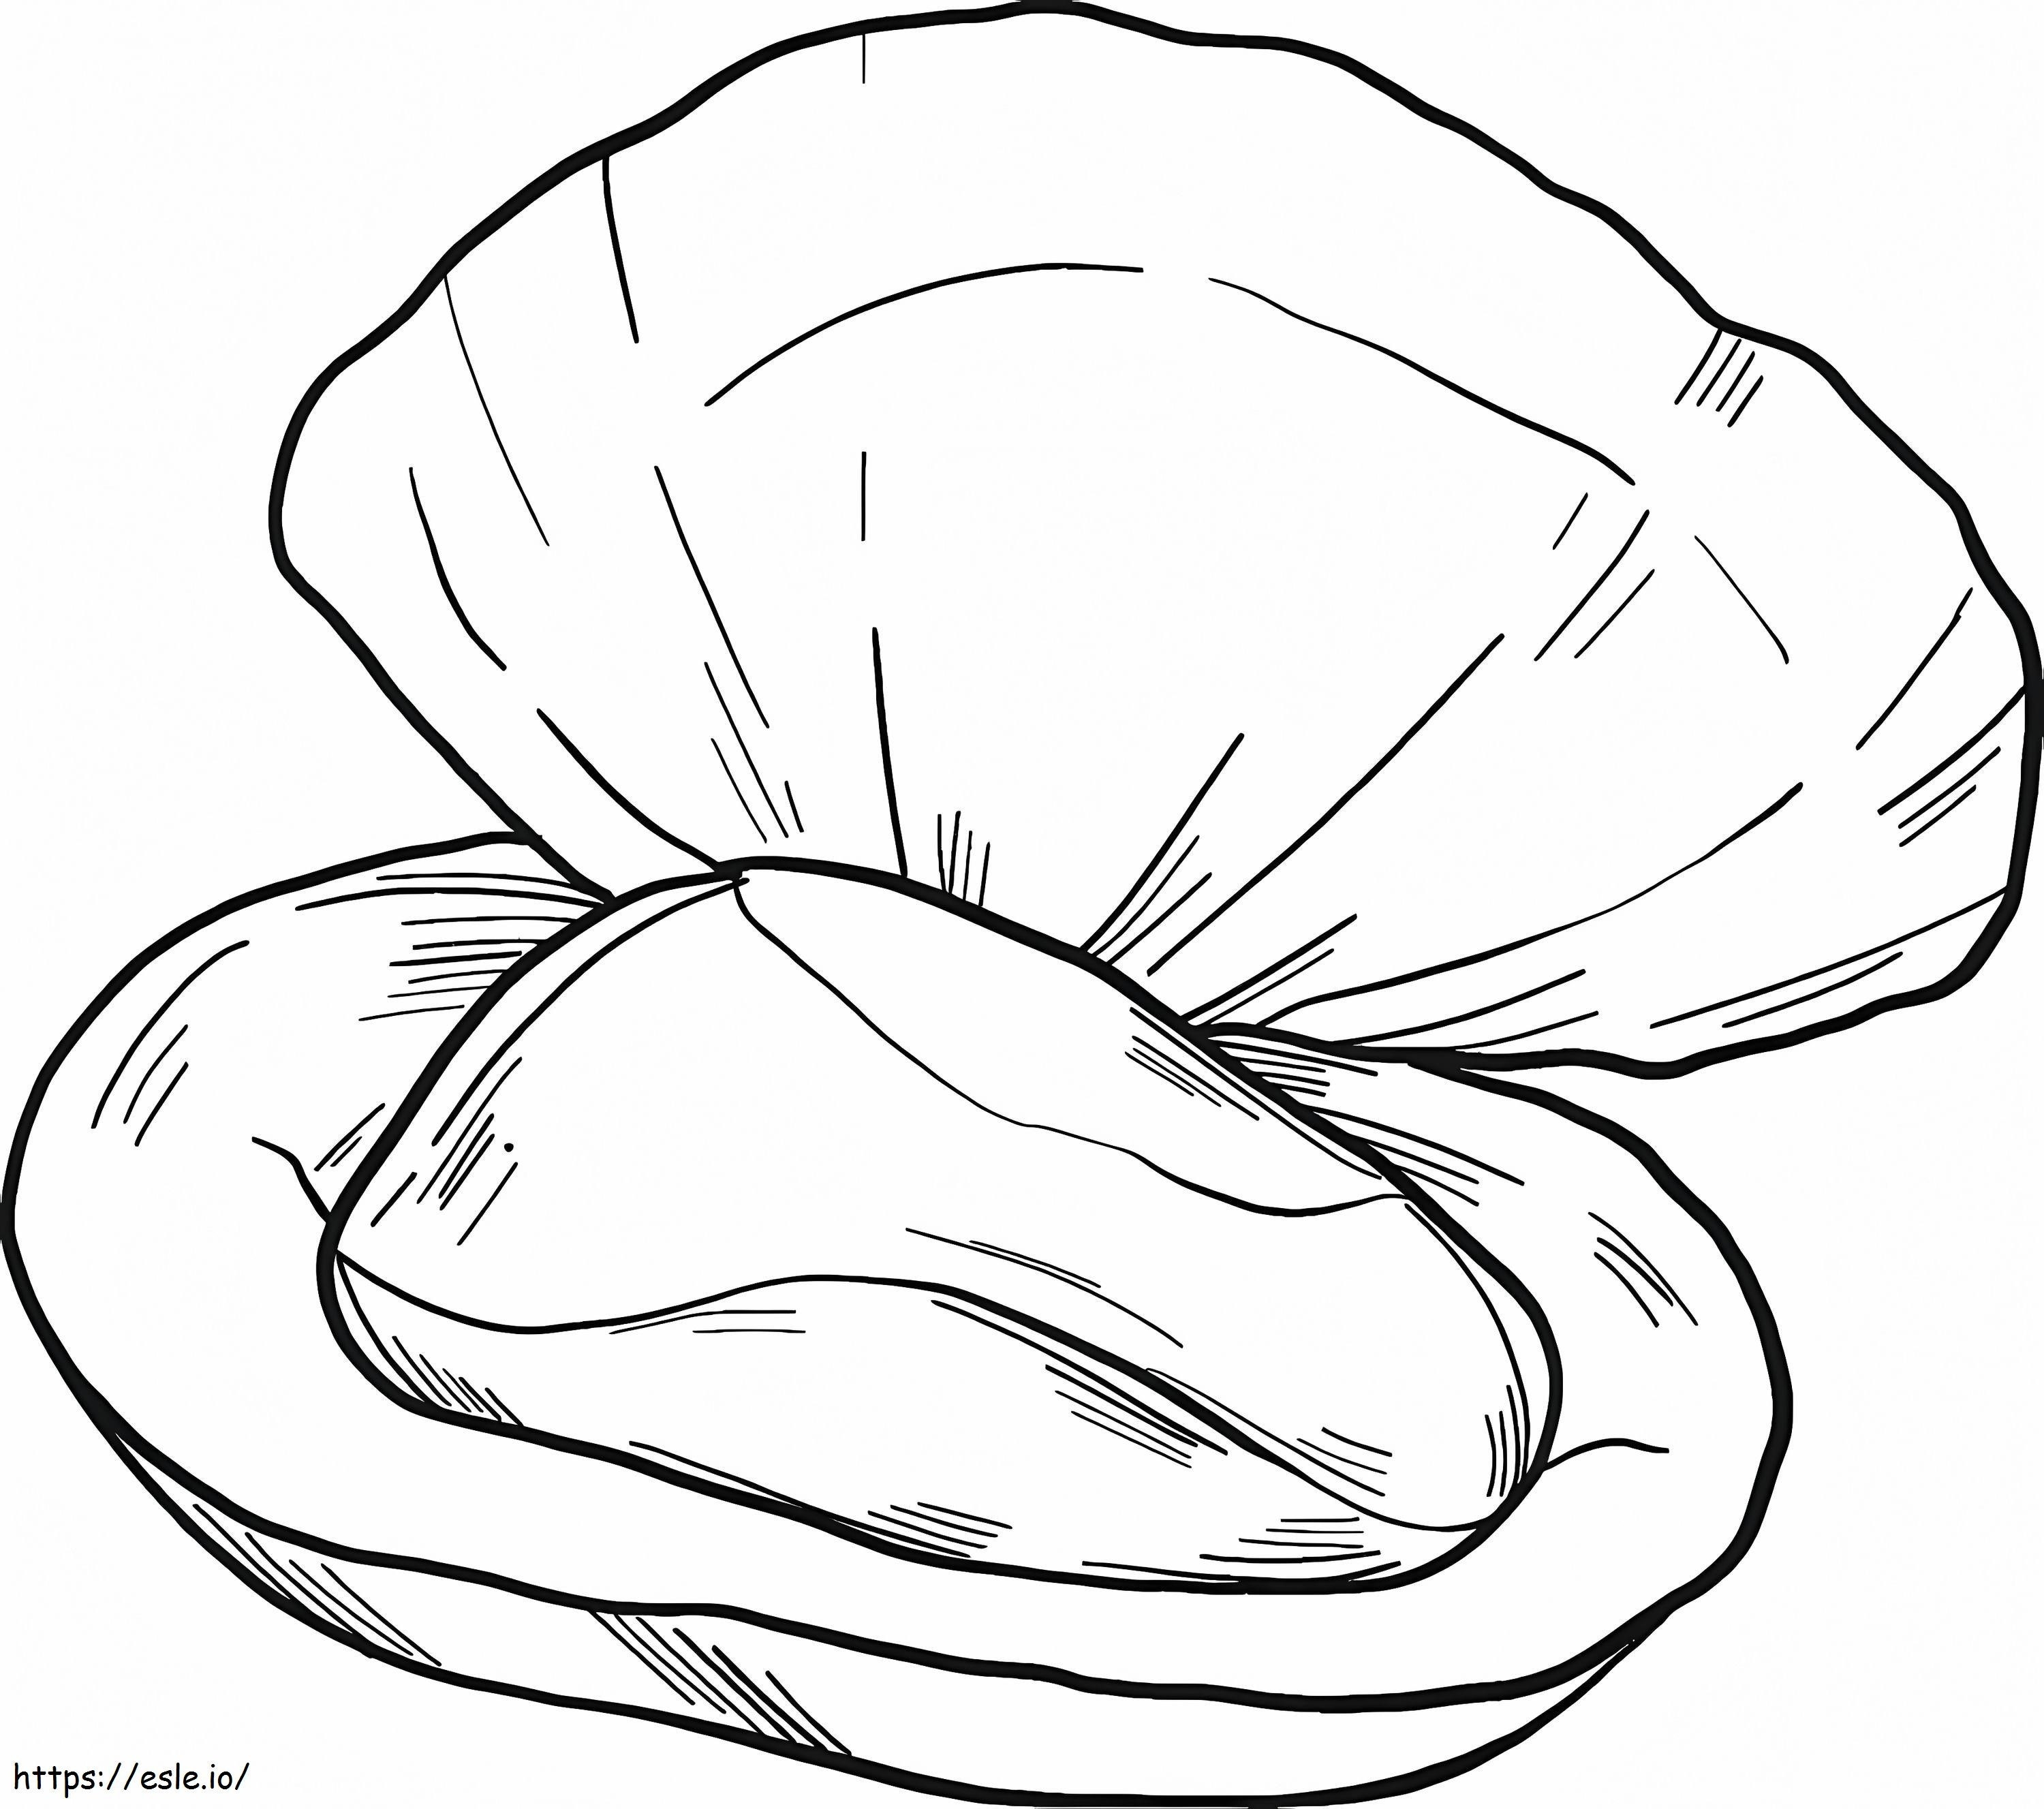 Normal Mussel coloring page